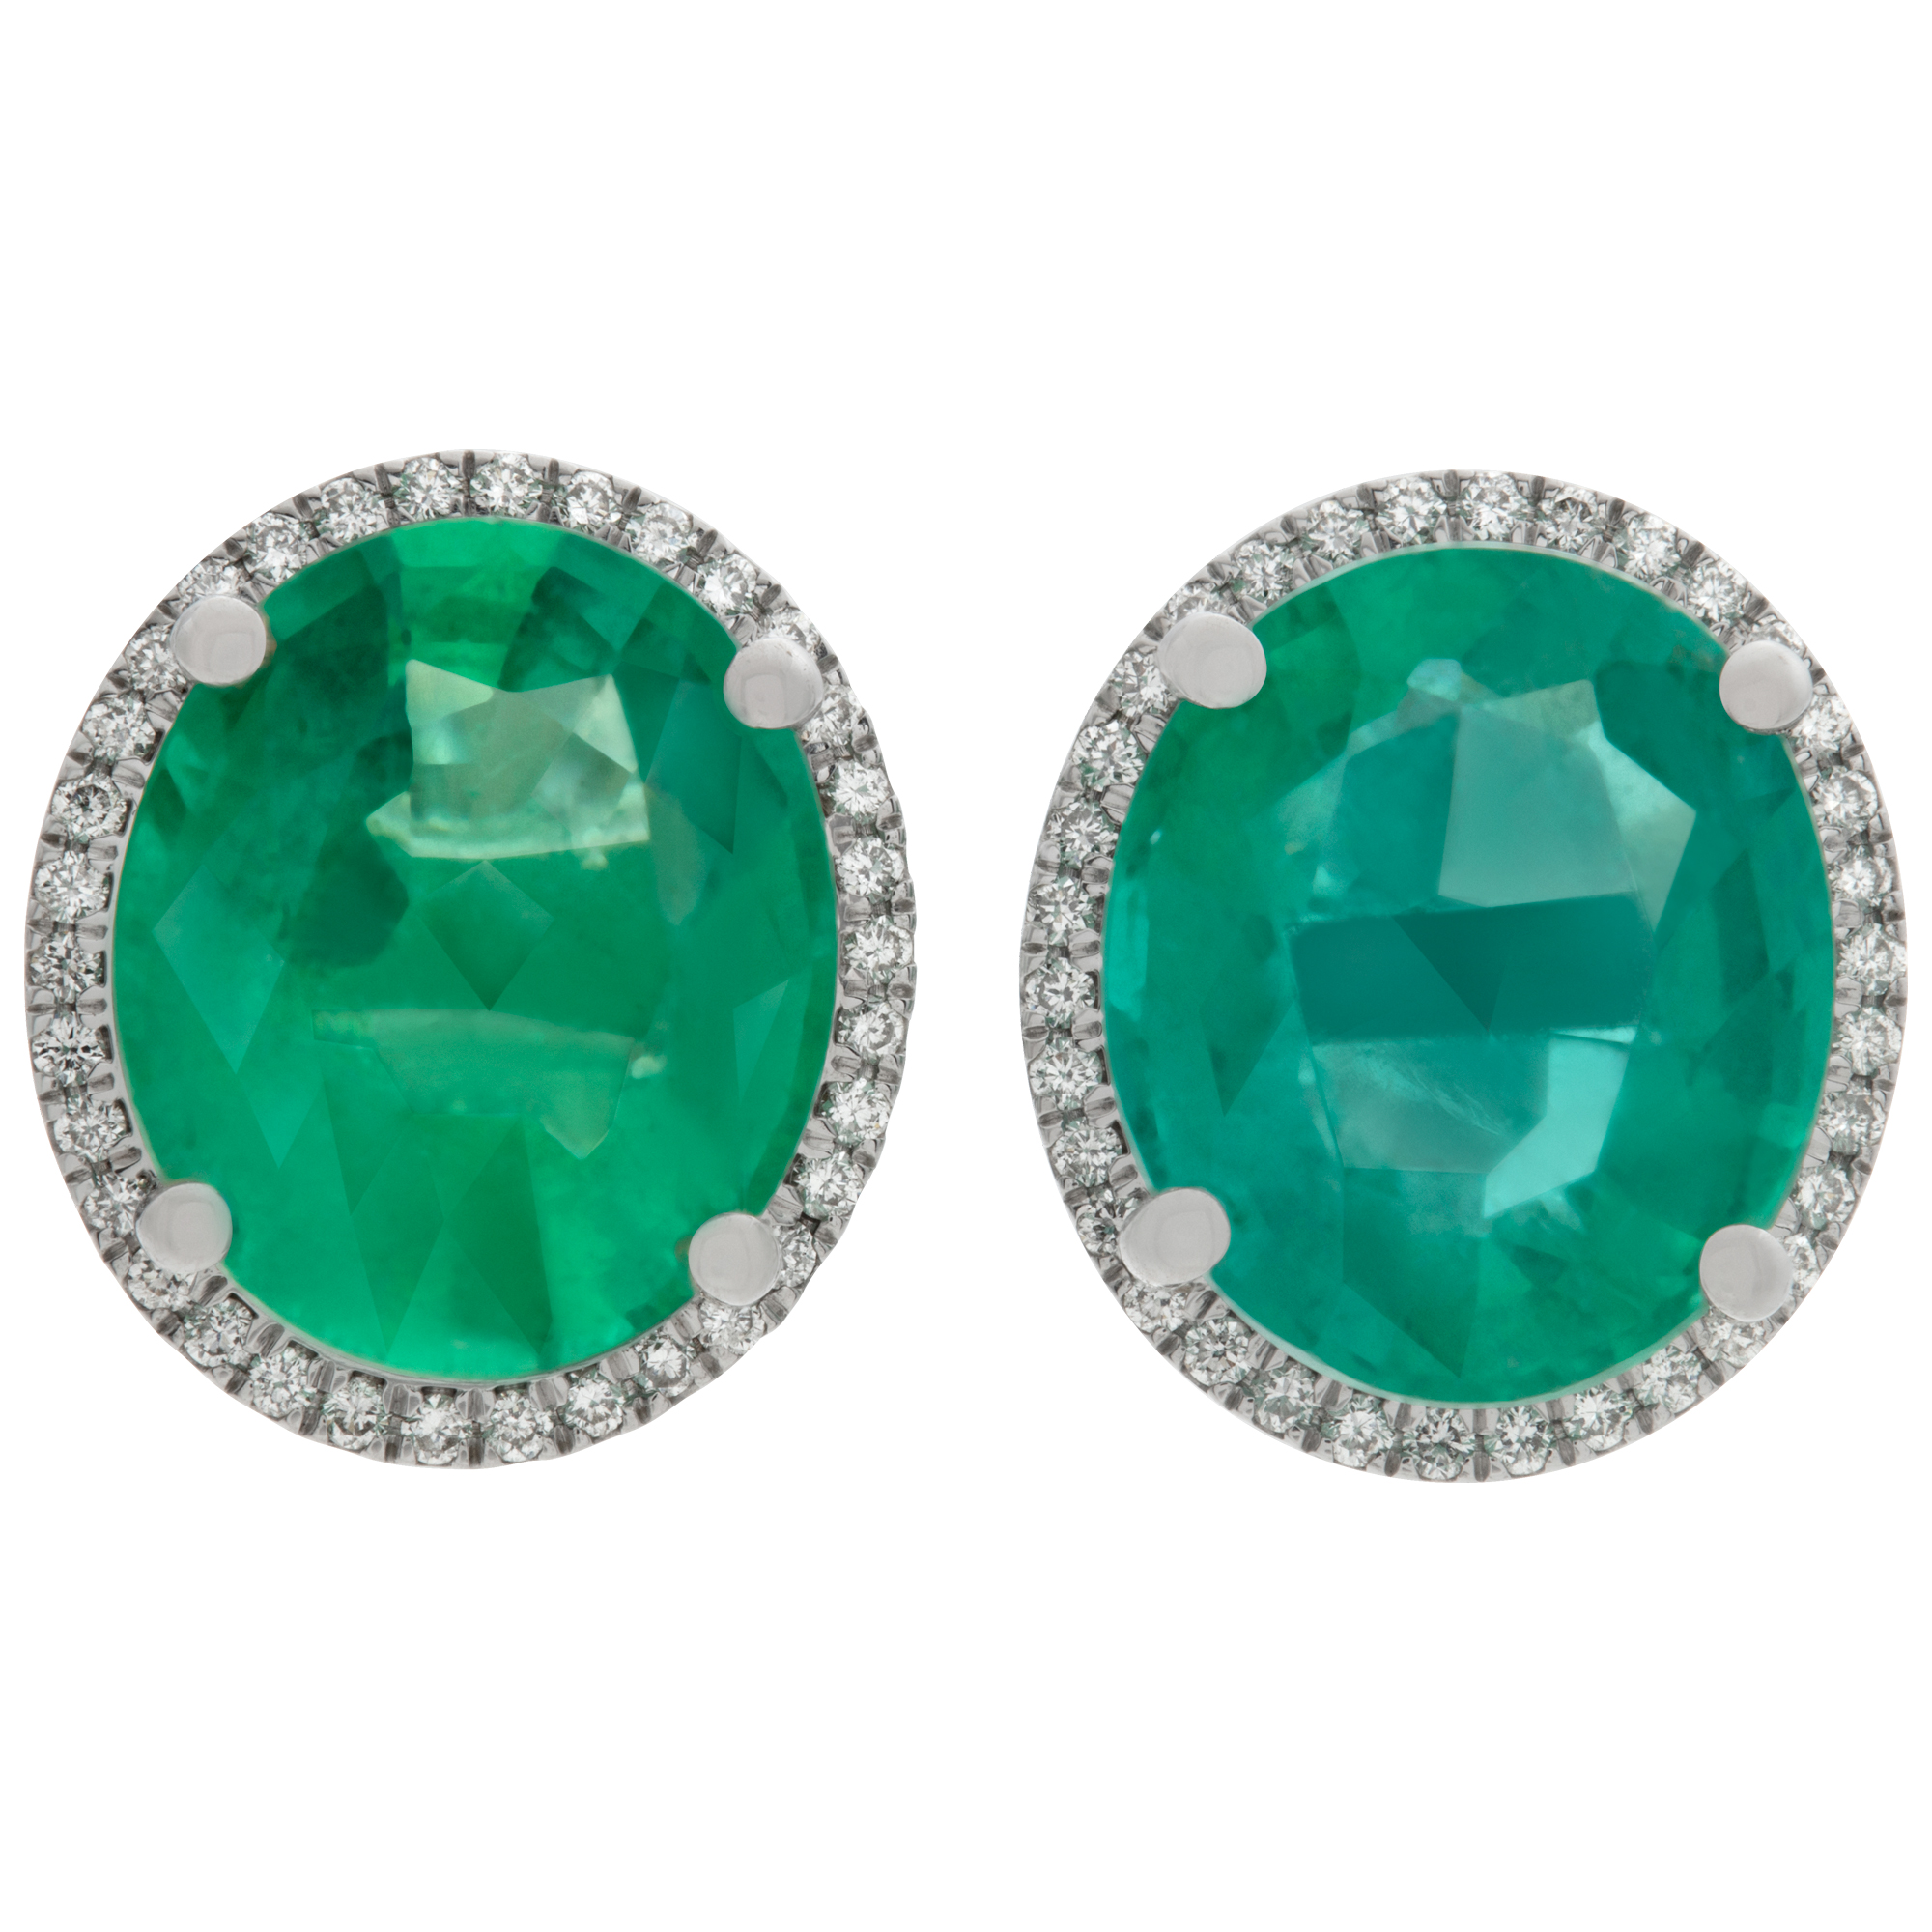 Emerald and diamond stud earrings in 18k white gold image 1